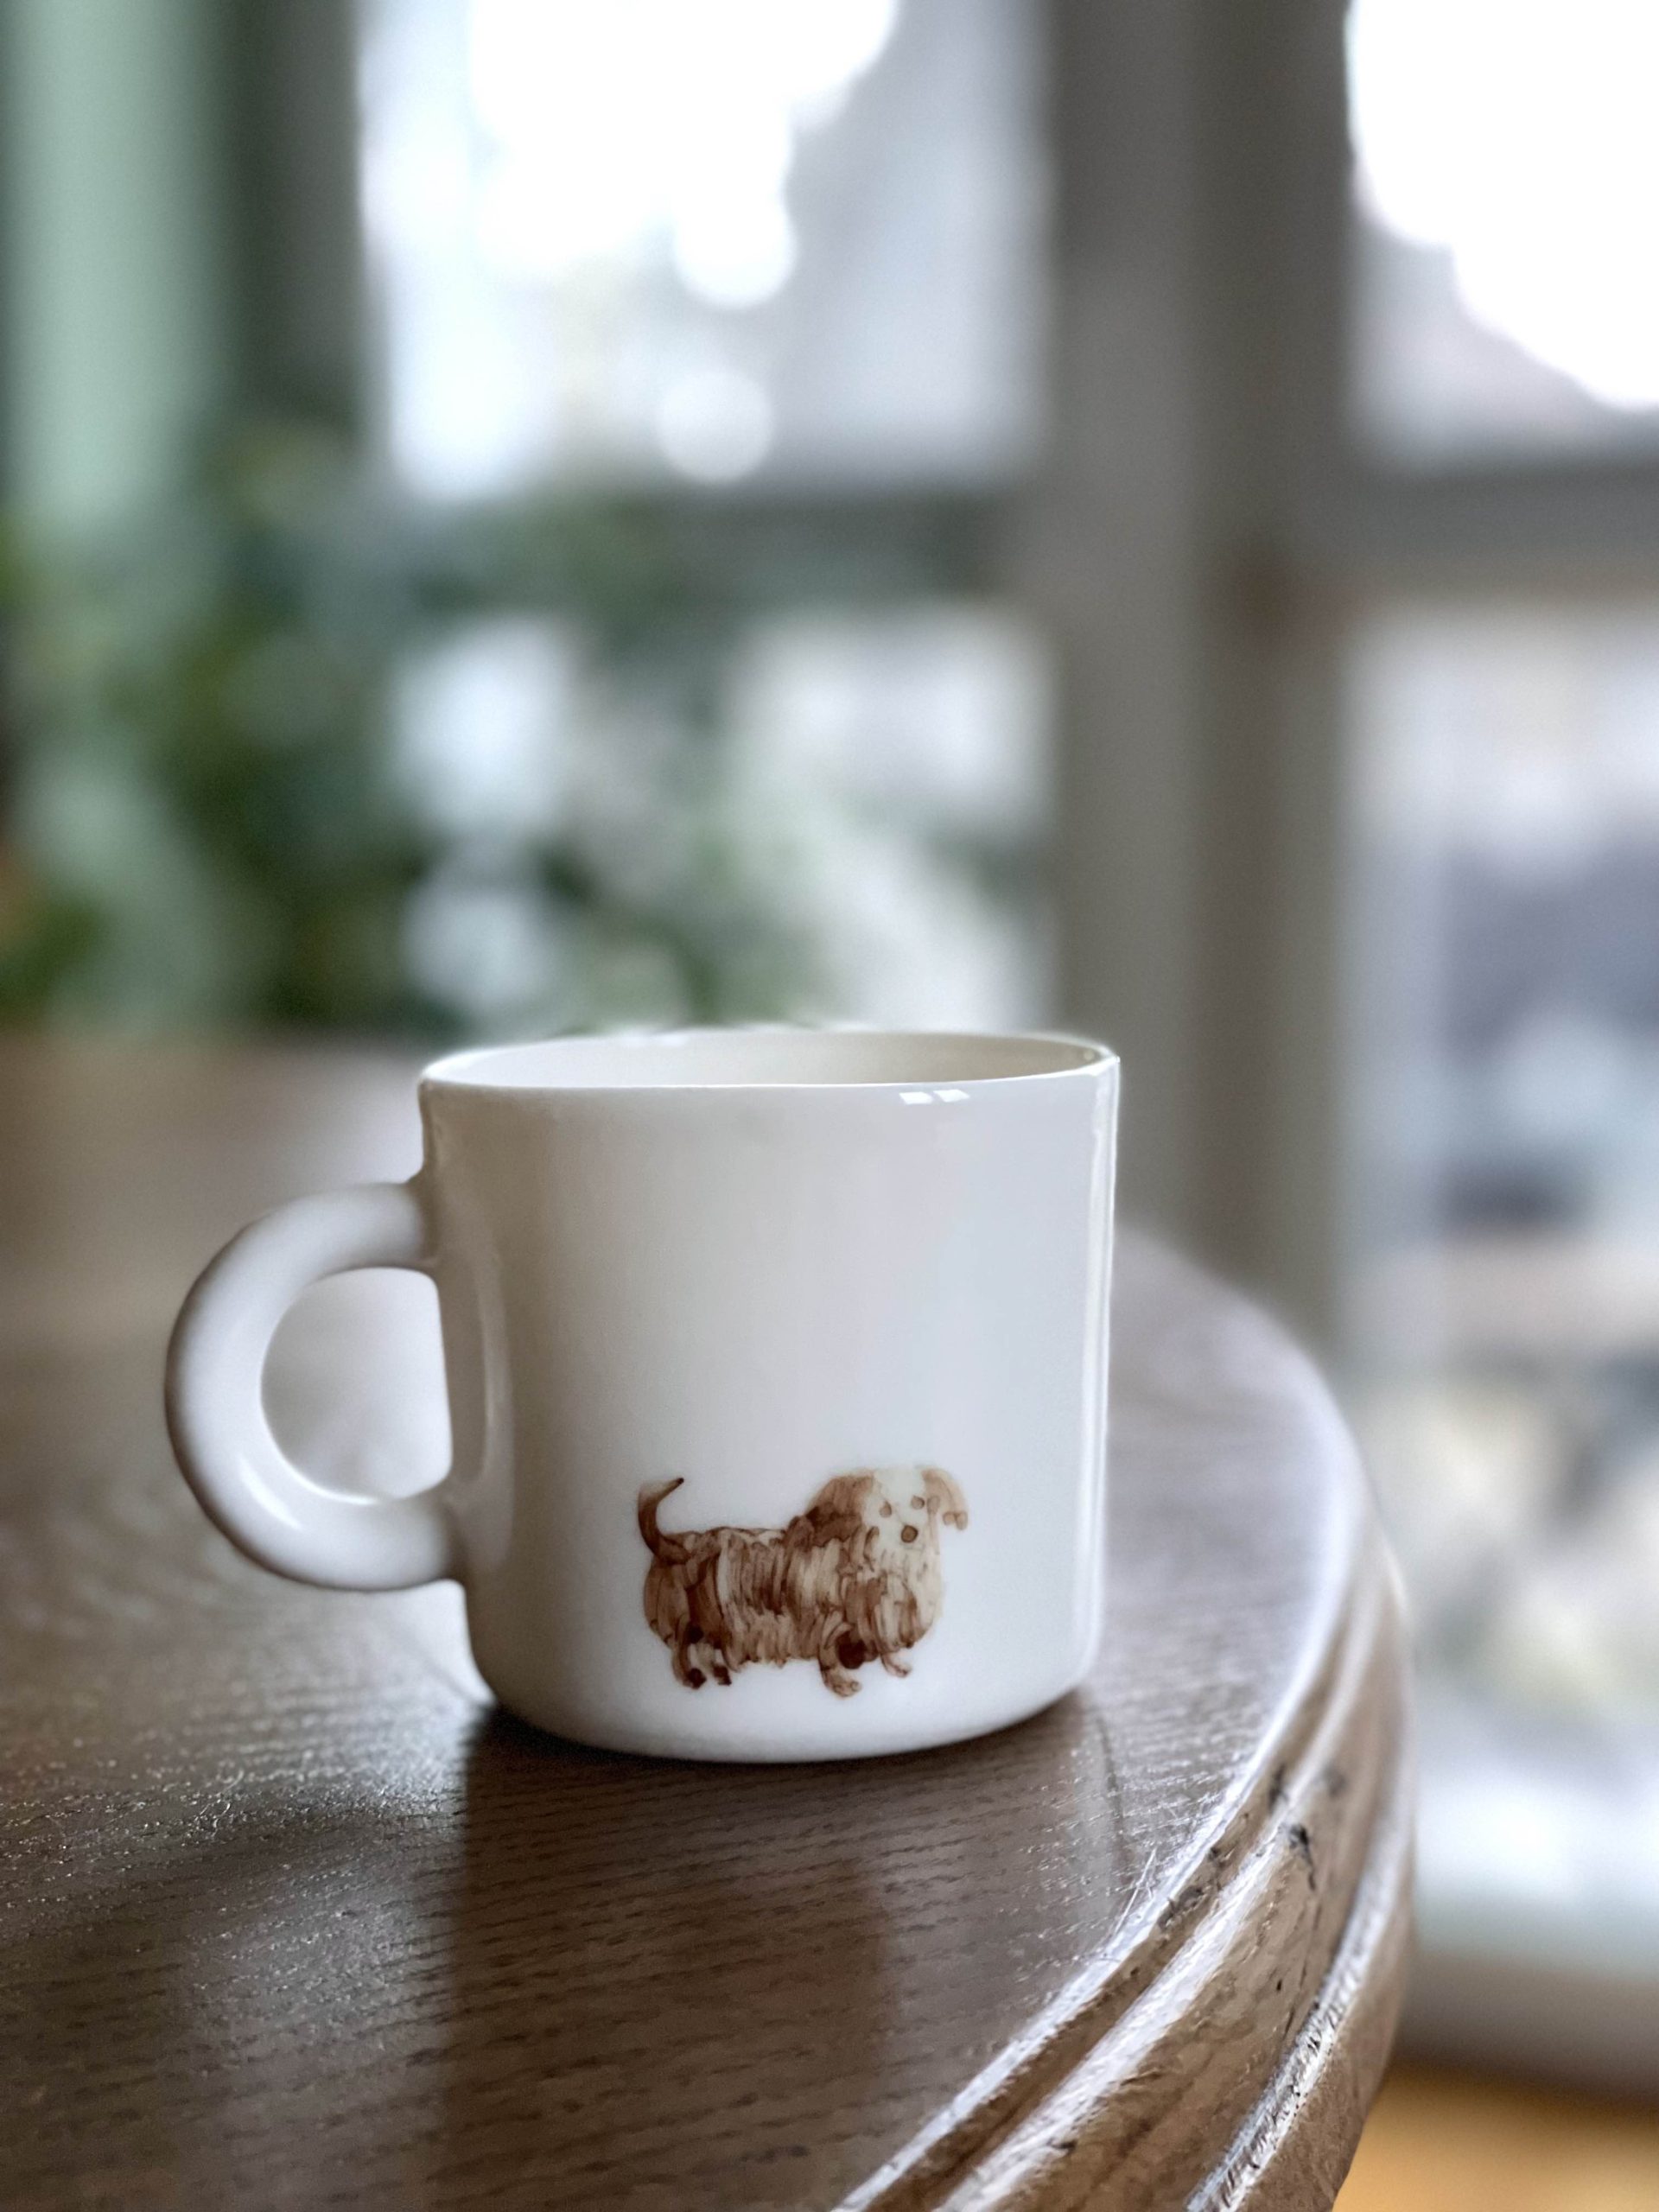 A mug with a dog for drinking cappuccino or other drink, capacity 160 ml, hand-painted illustration of a dog